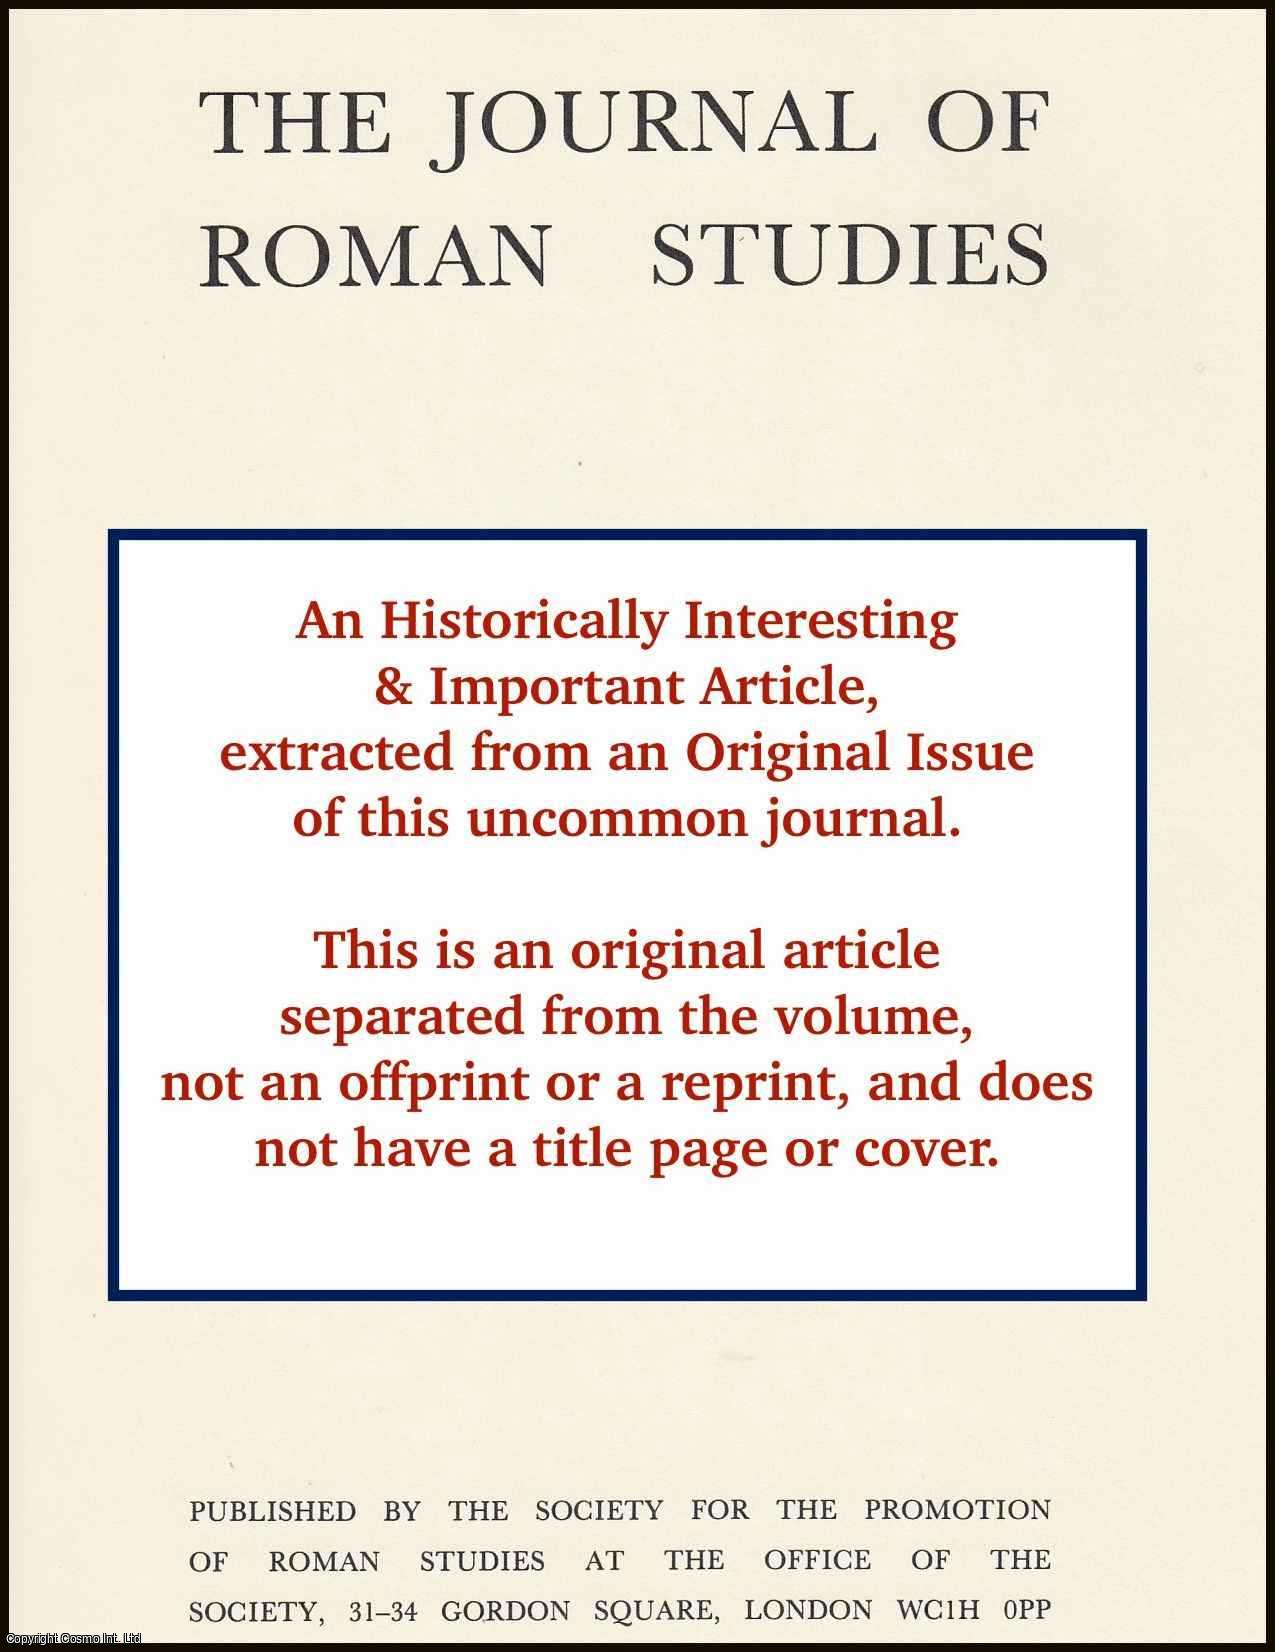 P.A. Brunt - The Administrators of Roman Egypt. An original article from the Journal of Roman Studies, 1975.